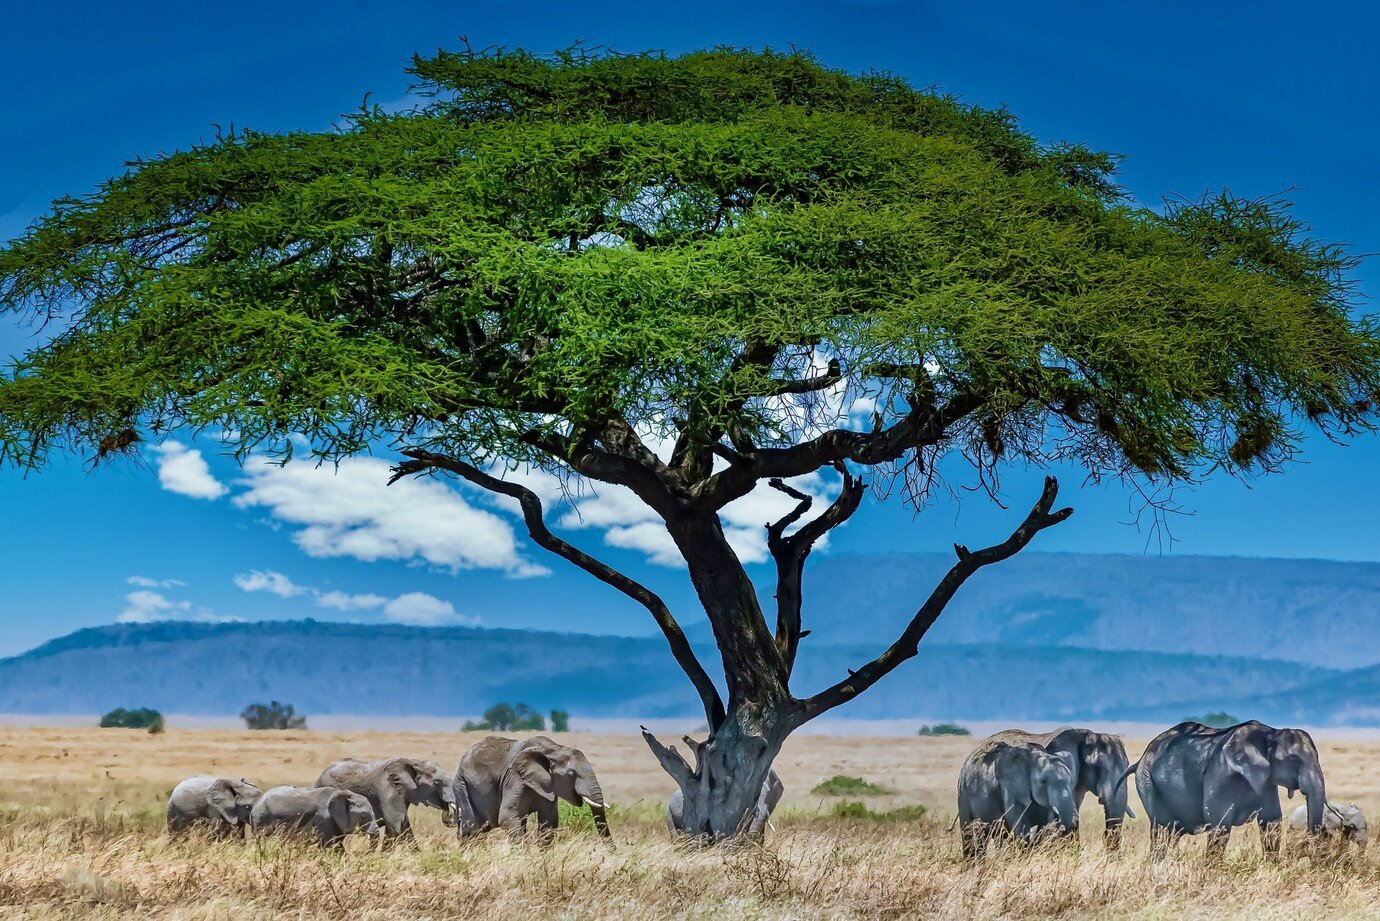 Elephants under the big green tree in the wilderness